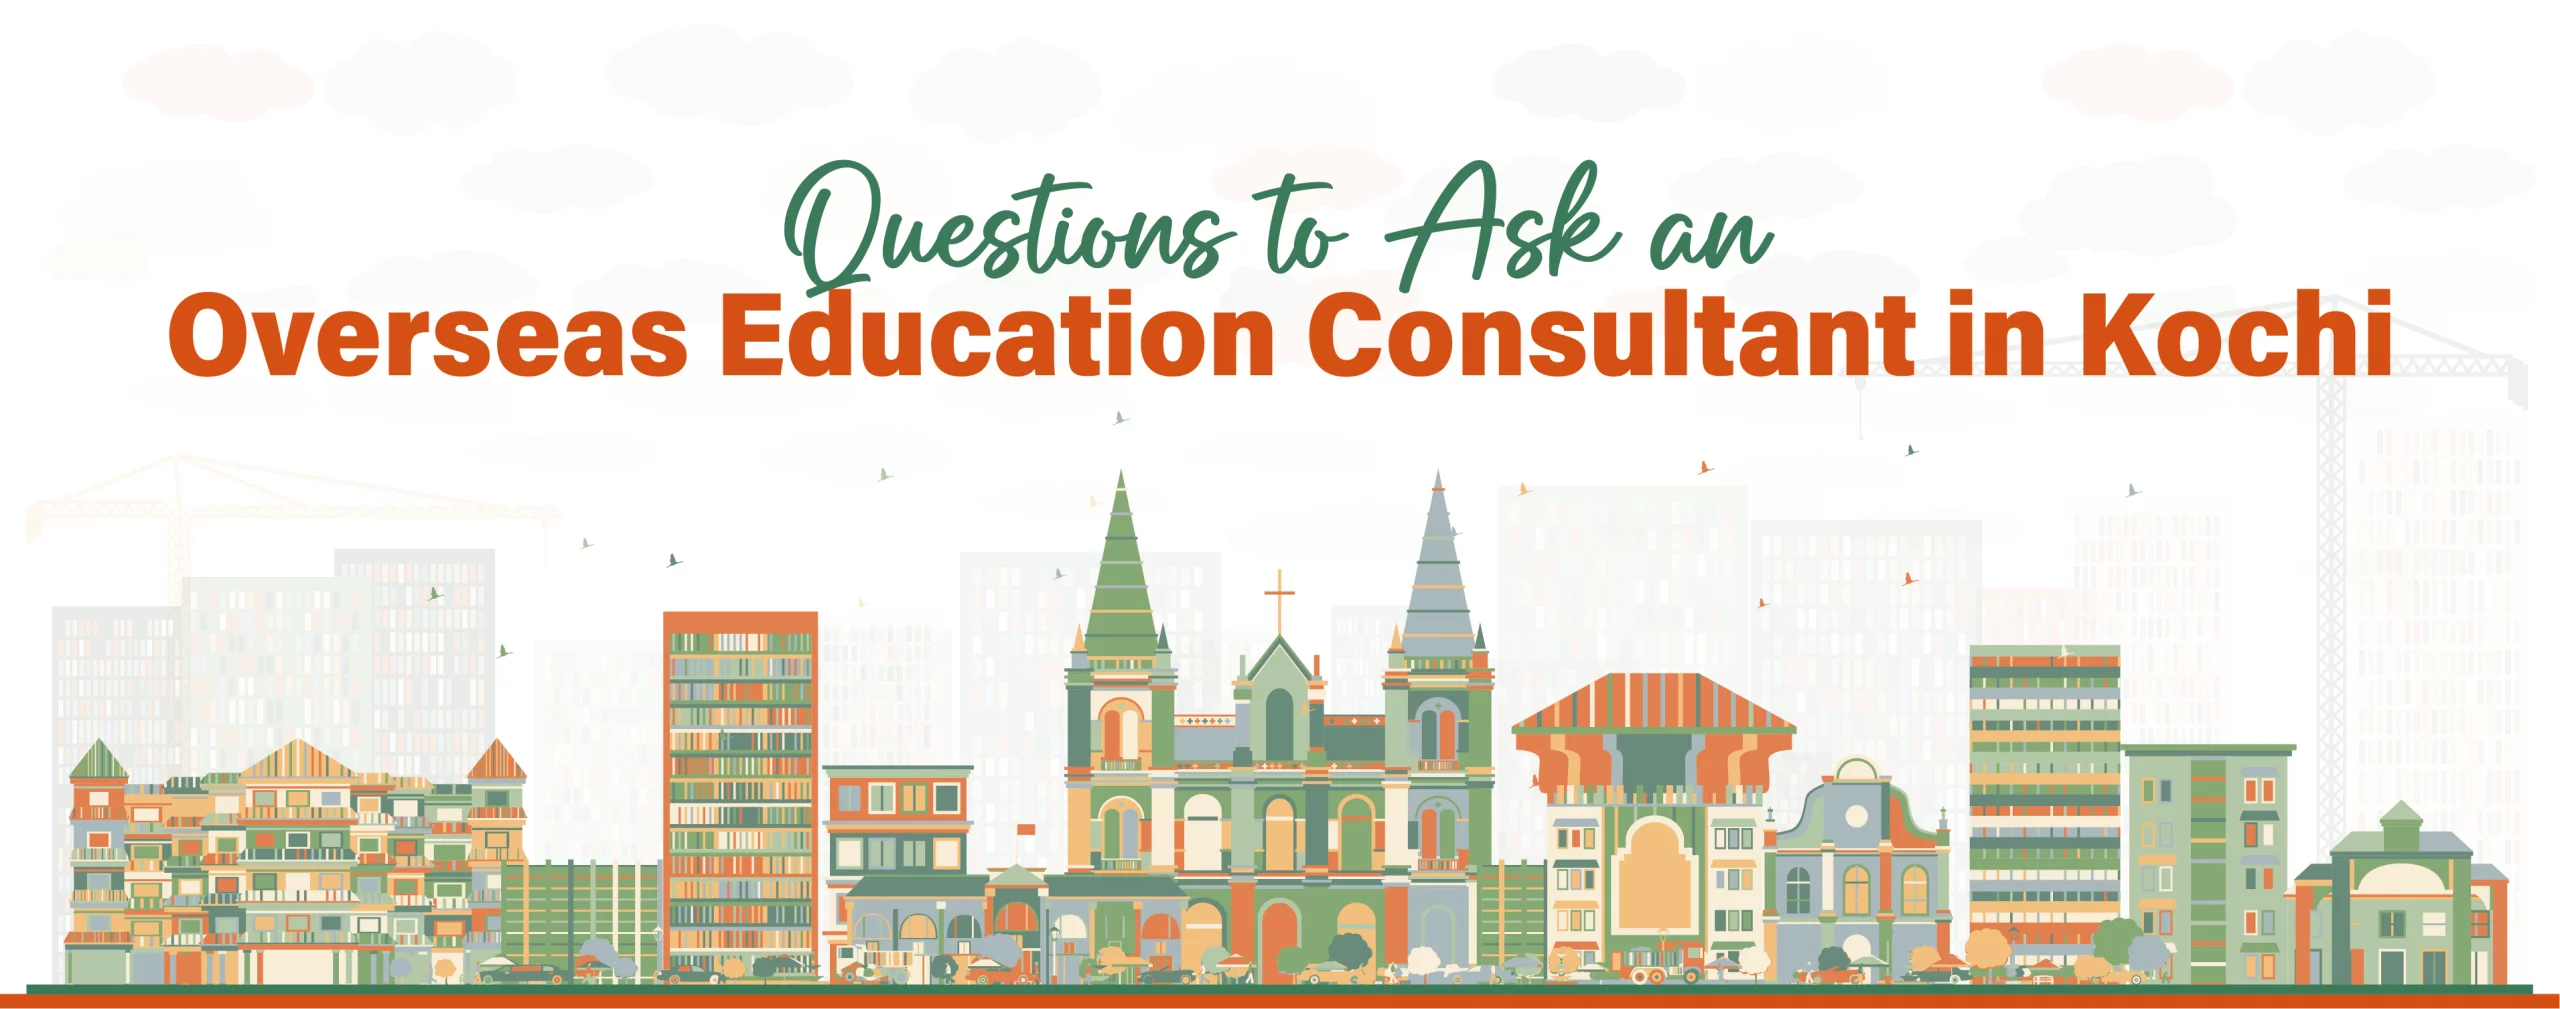 Questions to Ask an Overseas Education Consultant in Kochi